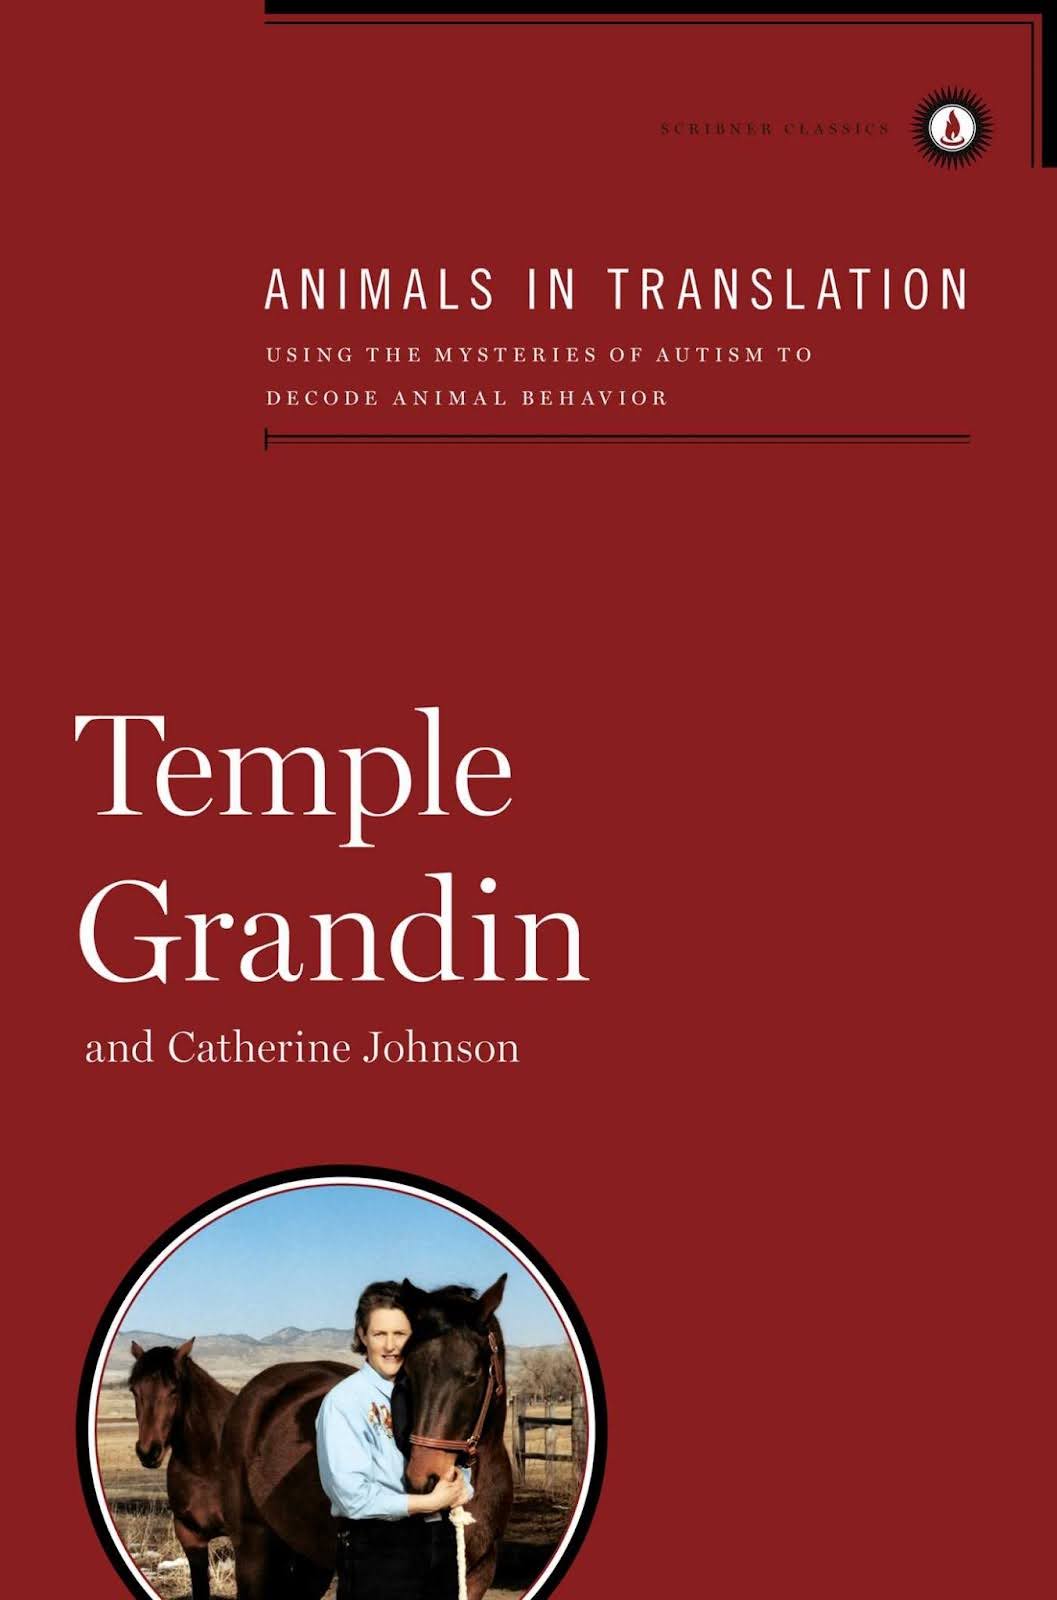 Book cover of Animals in Translation featuring a photo of the author, Temple Grandin, with a horse.